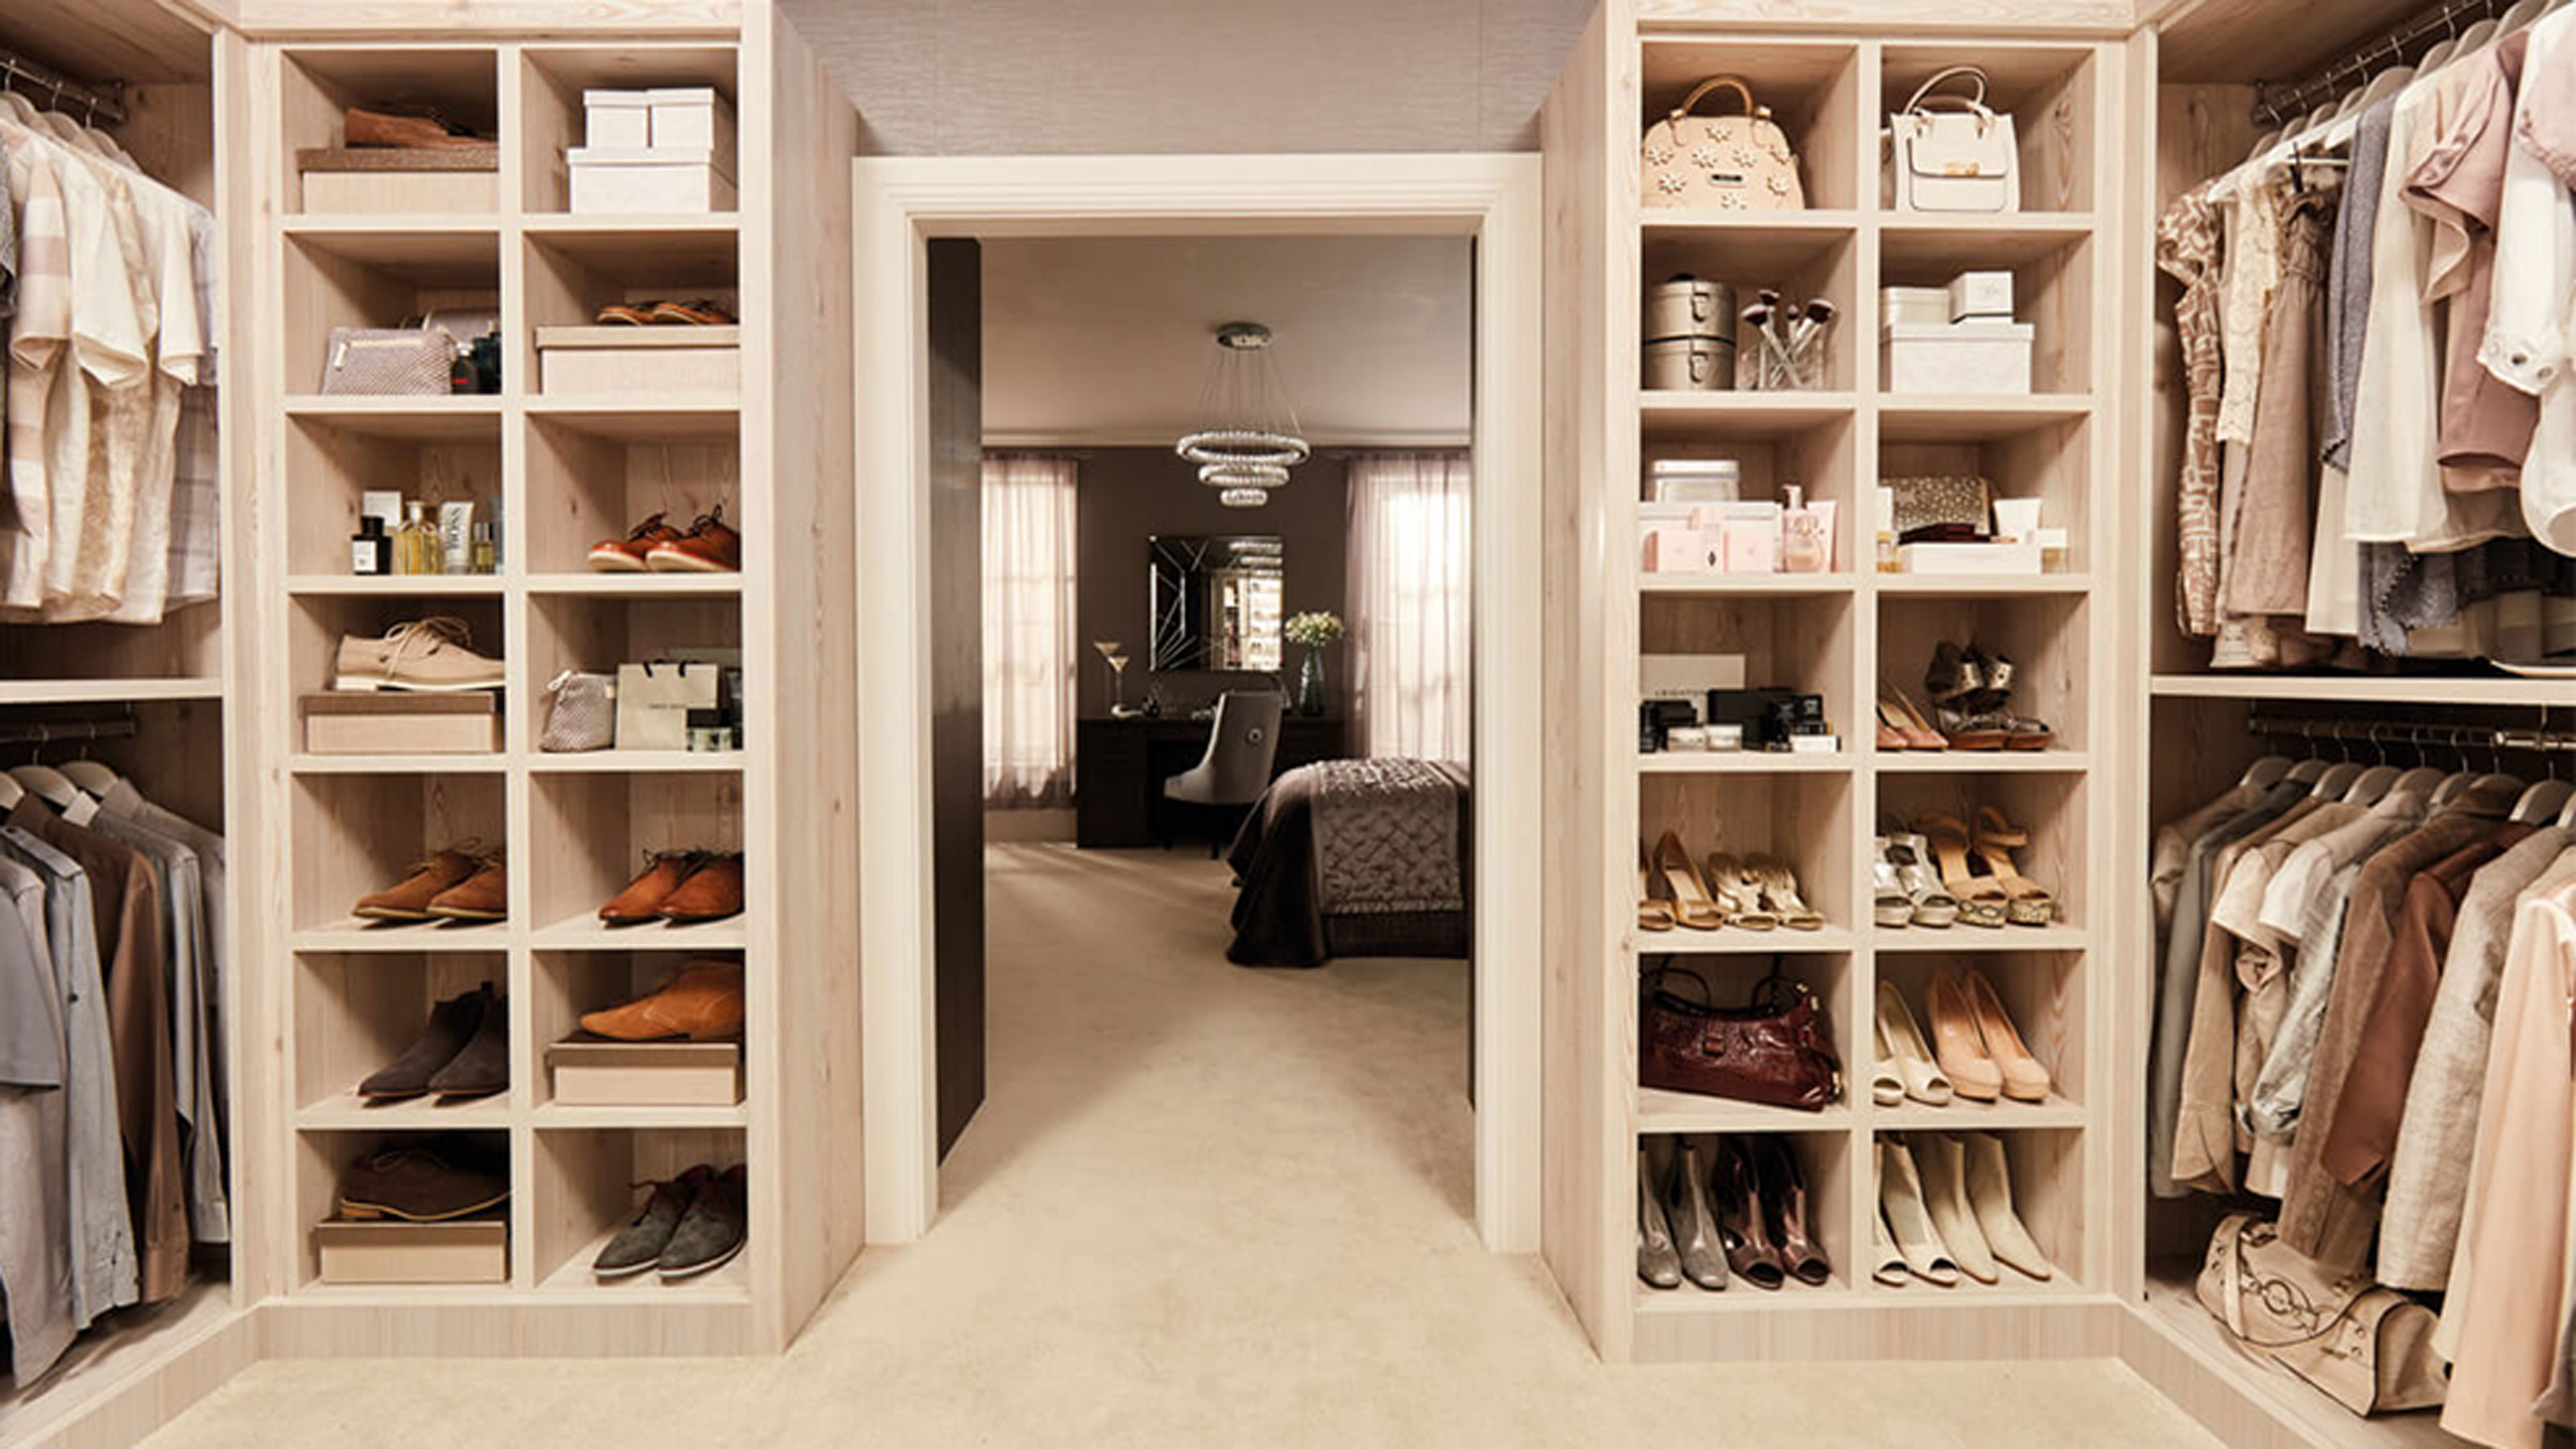 How Much Does It Cost To Do A Walk-In Closet? |